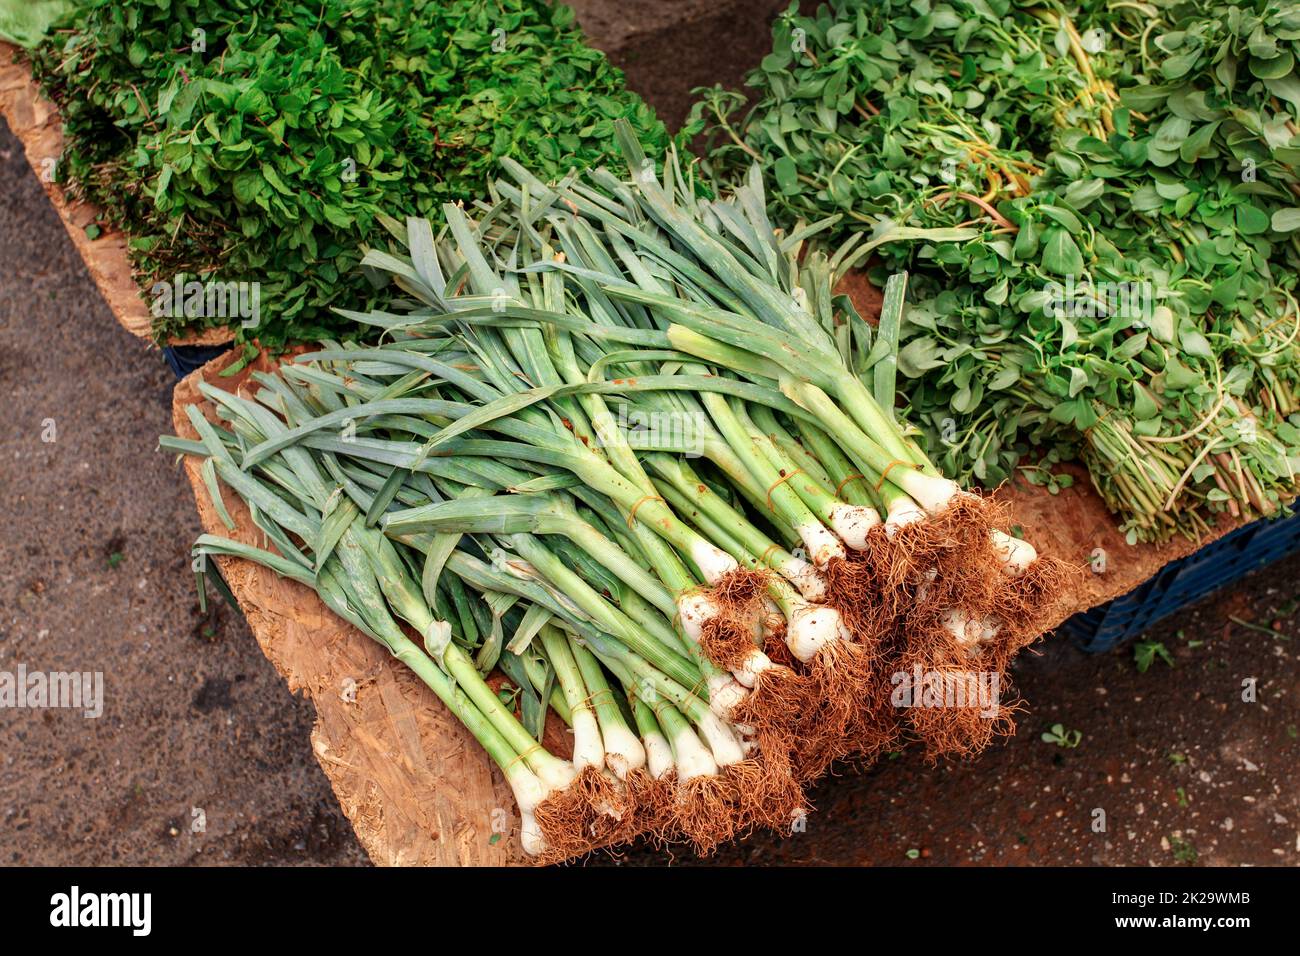 Bunch of spring onions, valerianella (corn salad) and mint leaves displayed on food market. Kyrenia, Cyprus. Stock Photo